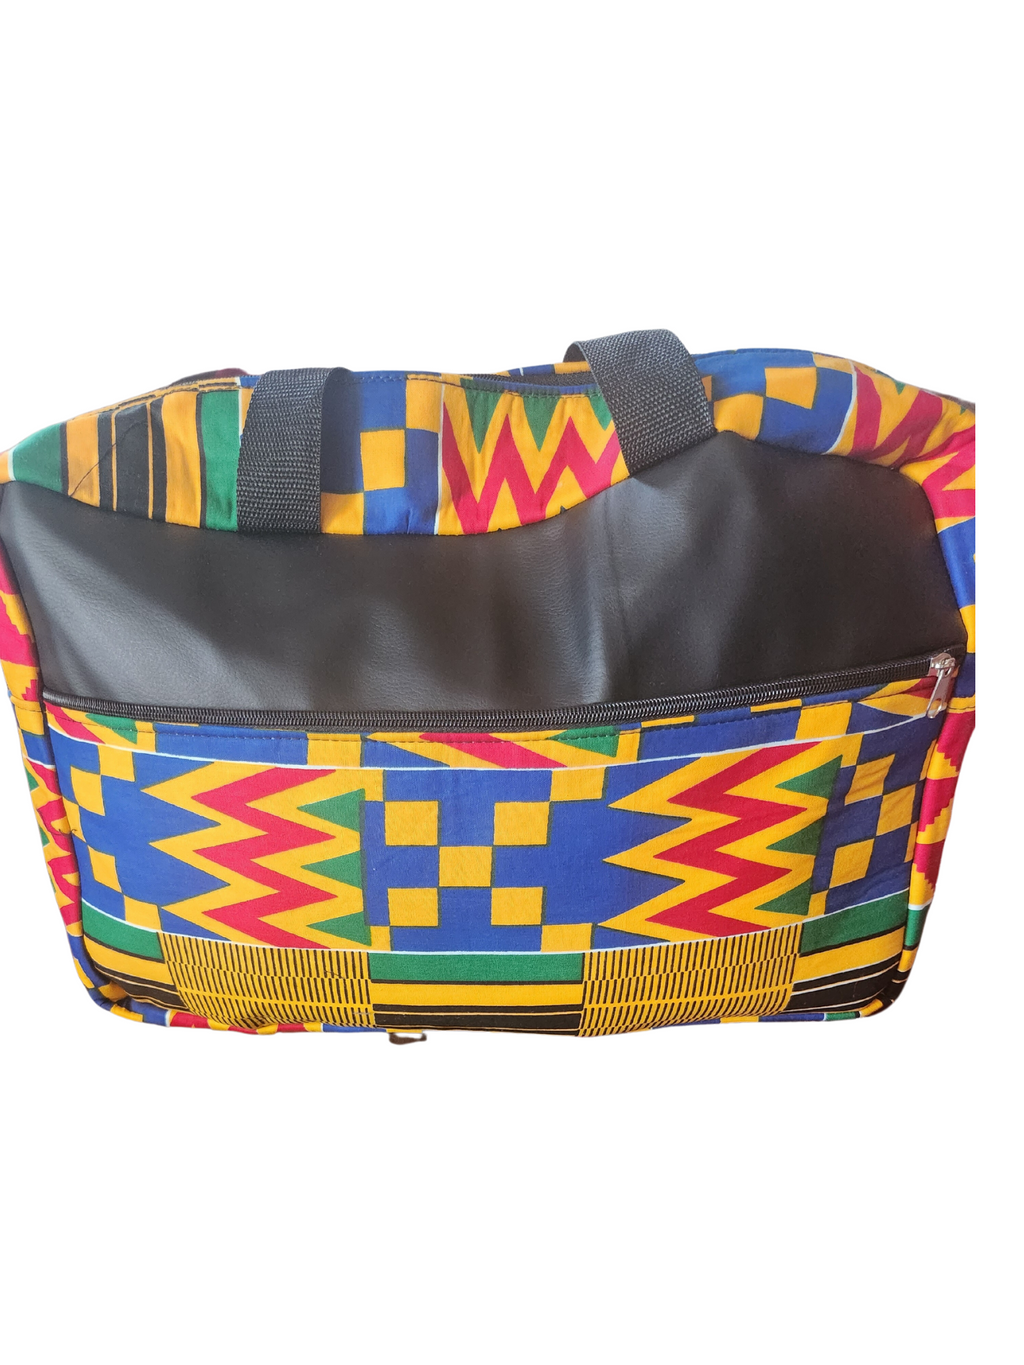 African duffle back